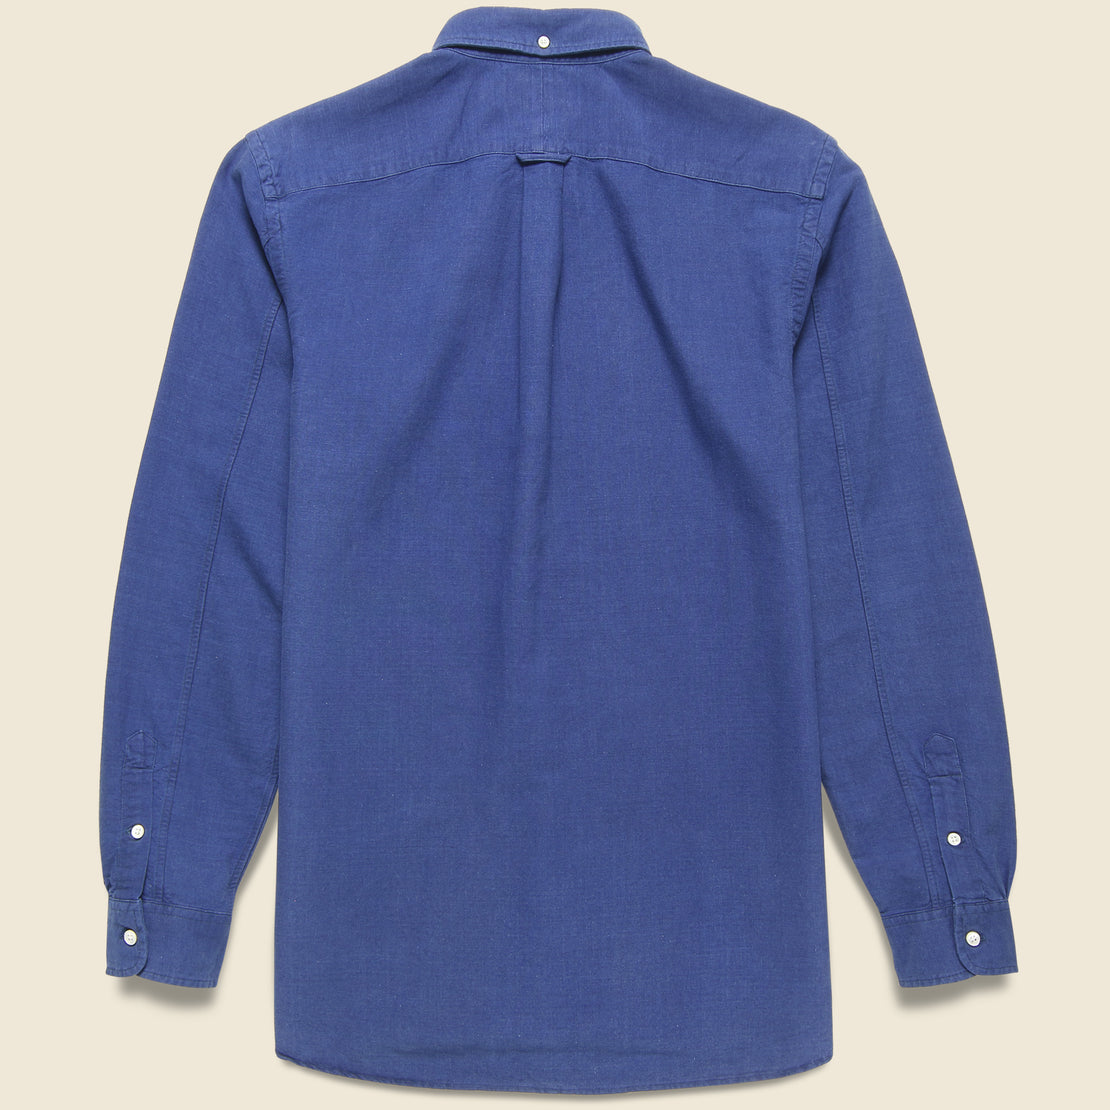 Indigo Oxford Shirt - Rinse Blue - RRL - STAG Provisions - Tops - L/S Woven - Solid